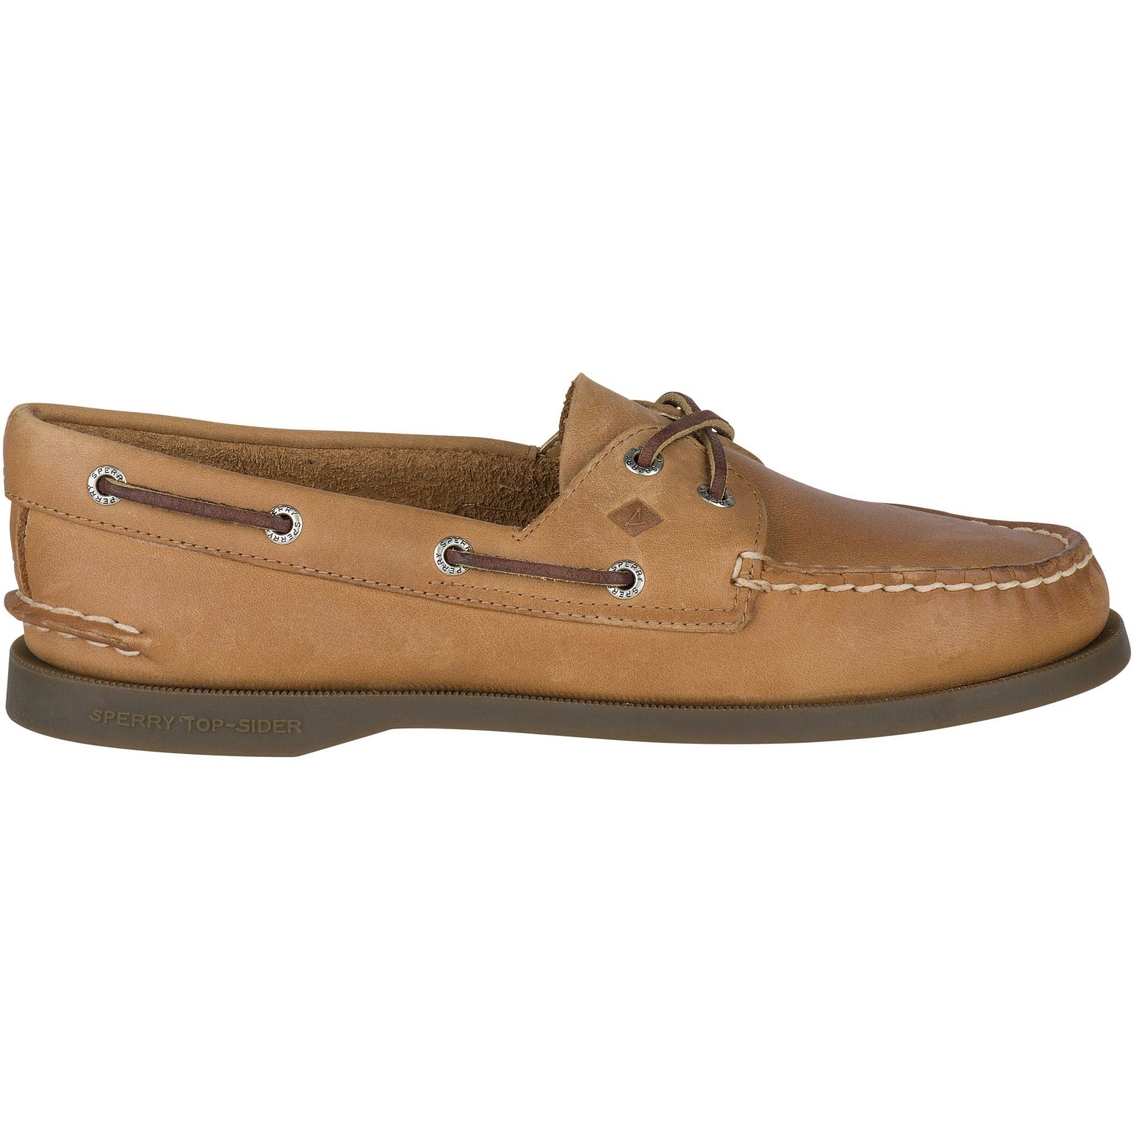 Sperry Authentic Original Two Eye Boat Shoes - Image 2 of 6